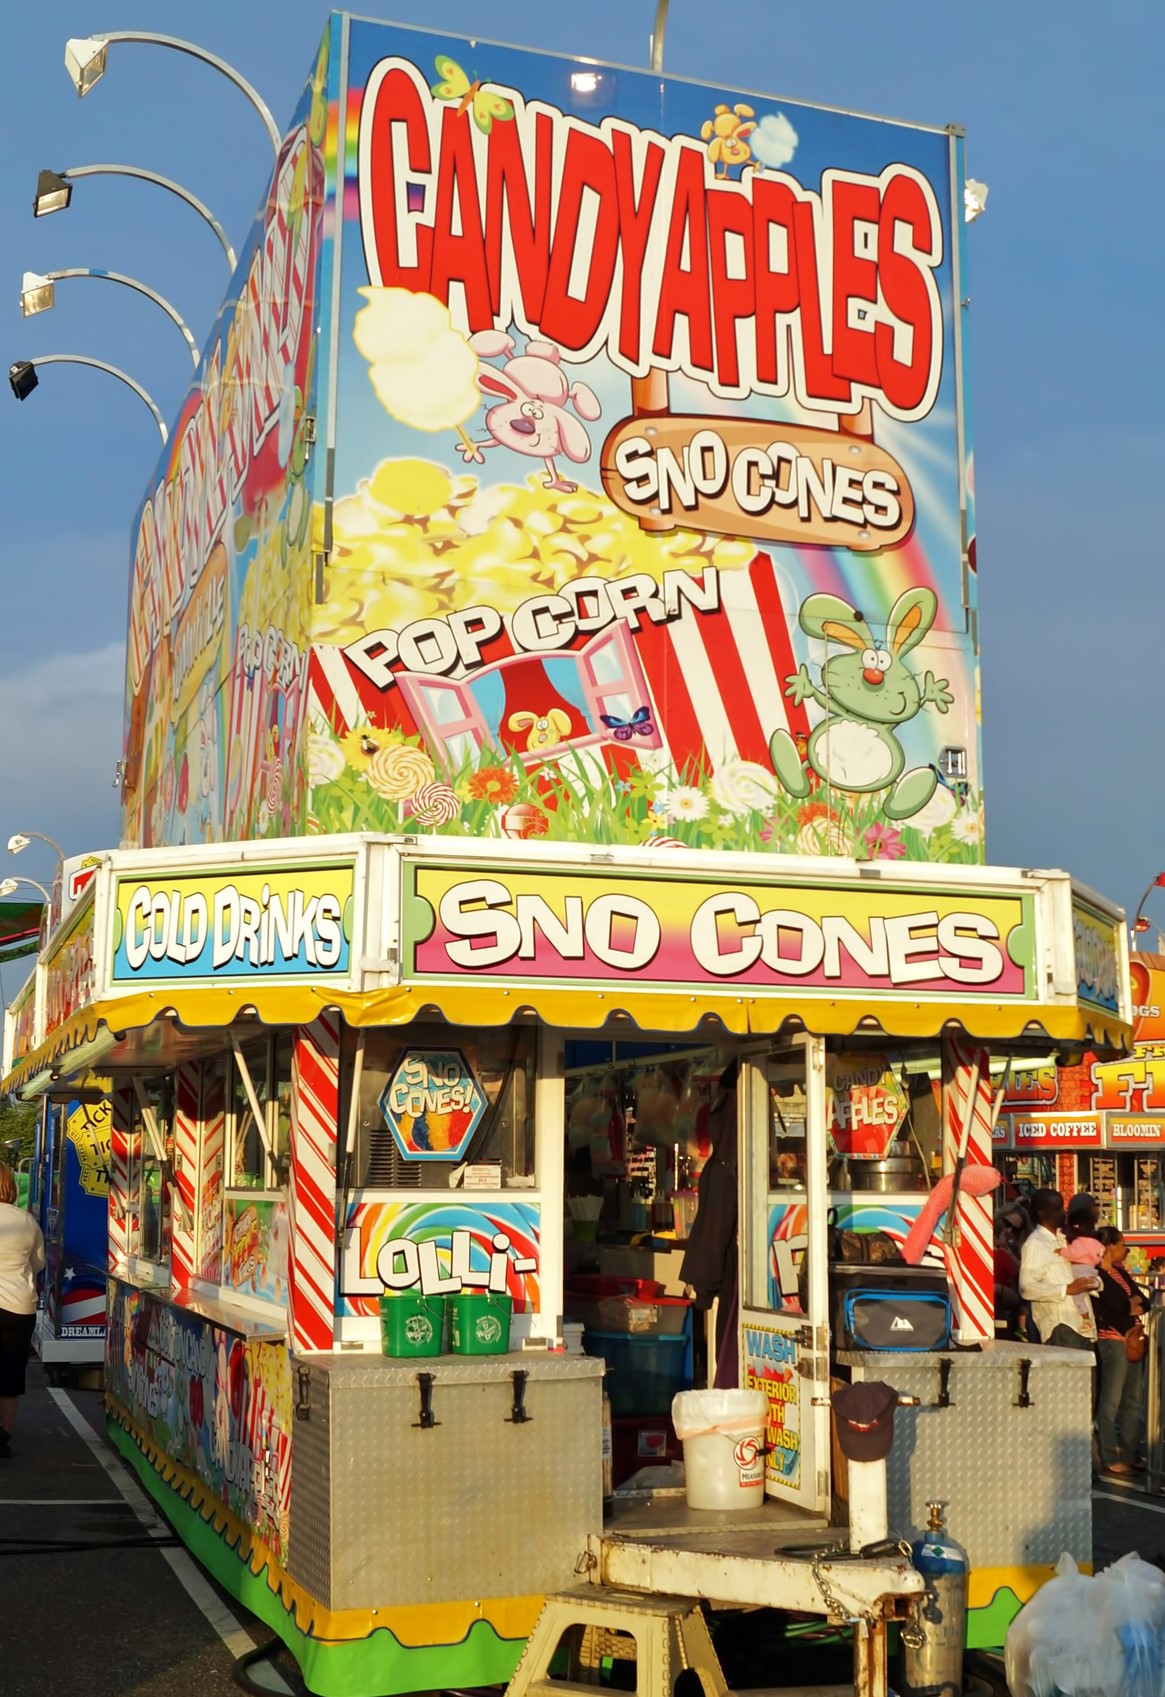 People wait in line to buy snack food at a traveling summer carnival.